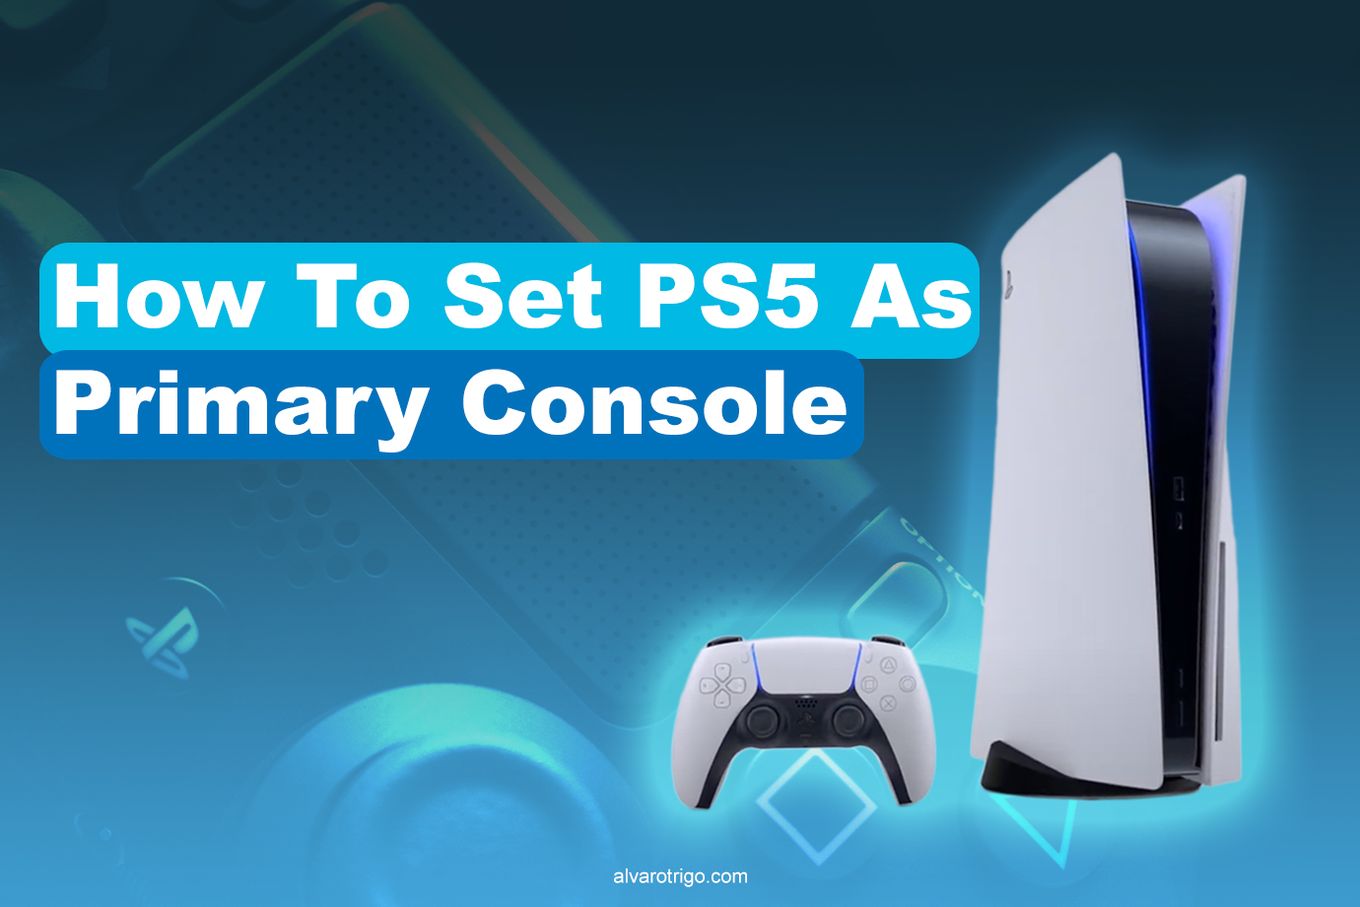 How To Set PS5 As The Primary Console